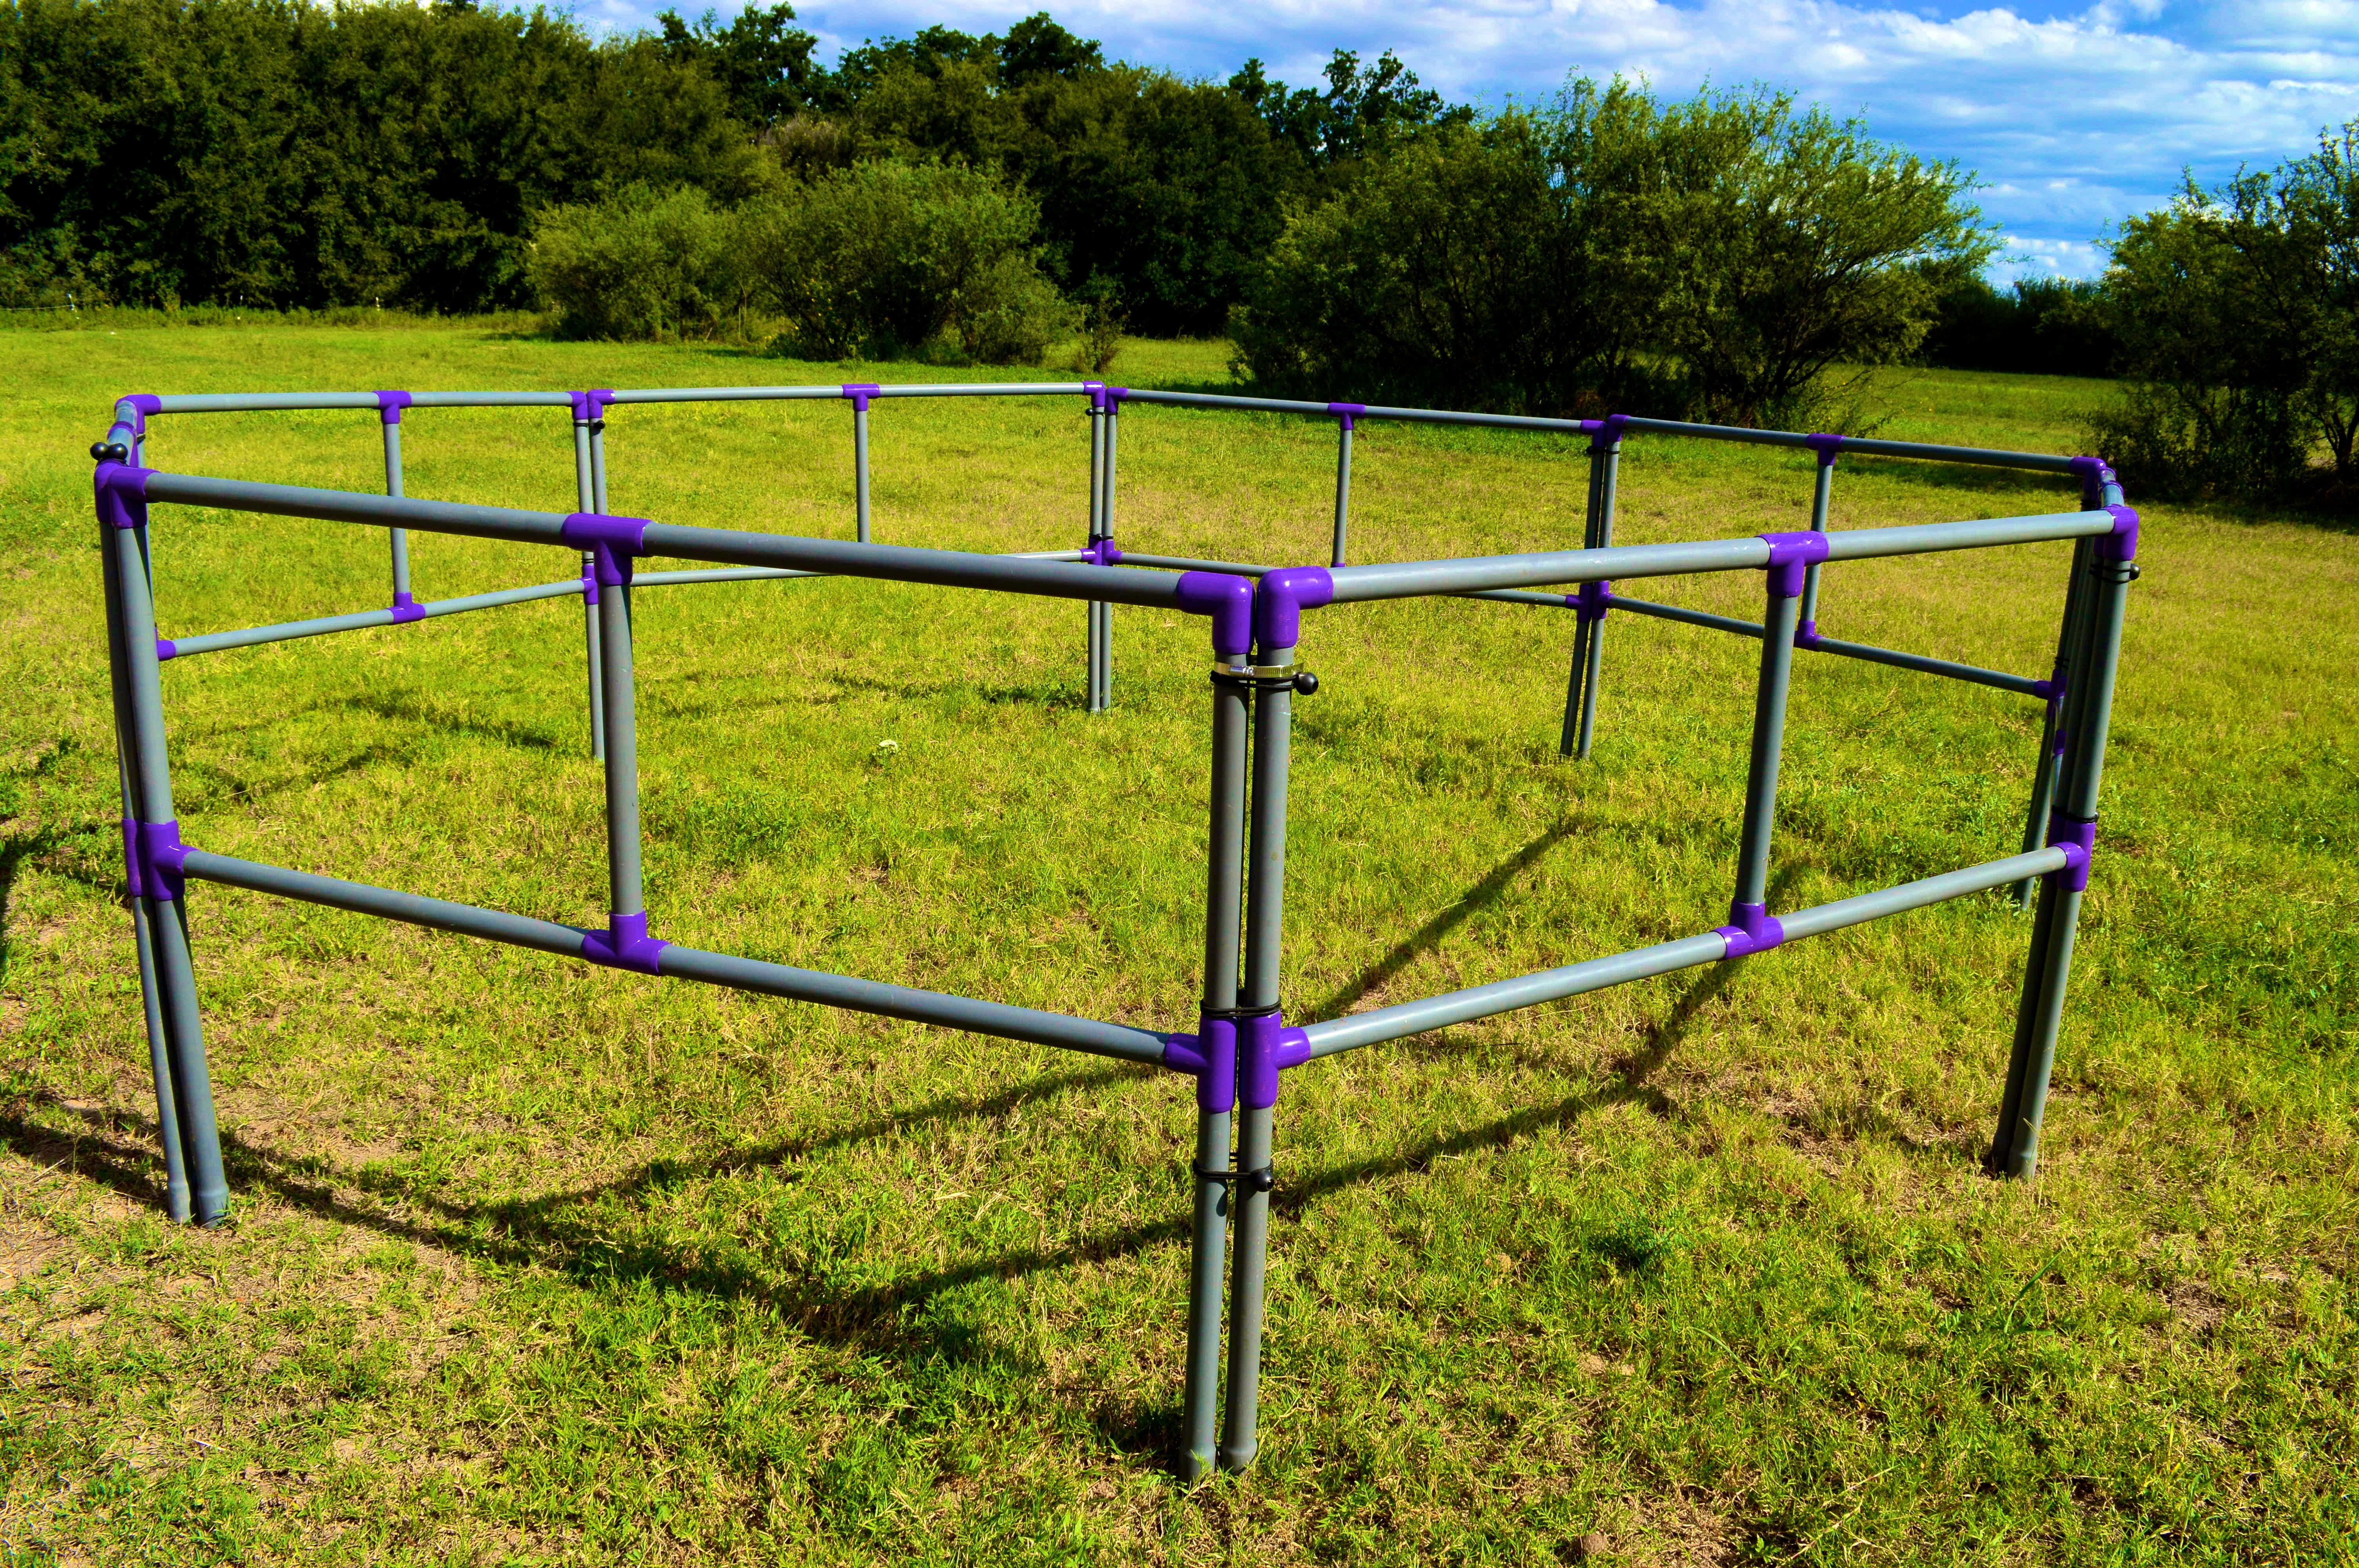 Portable Horse Corrals And Products Or Chicken Run With Some Wire within proportions 6016 X 4000